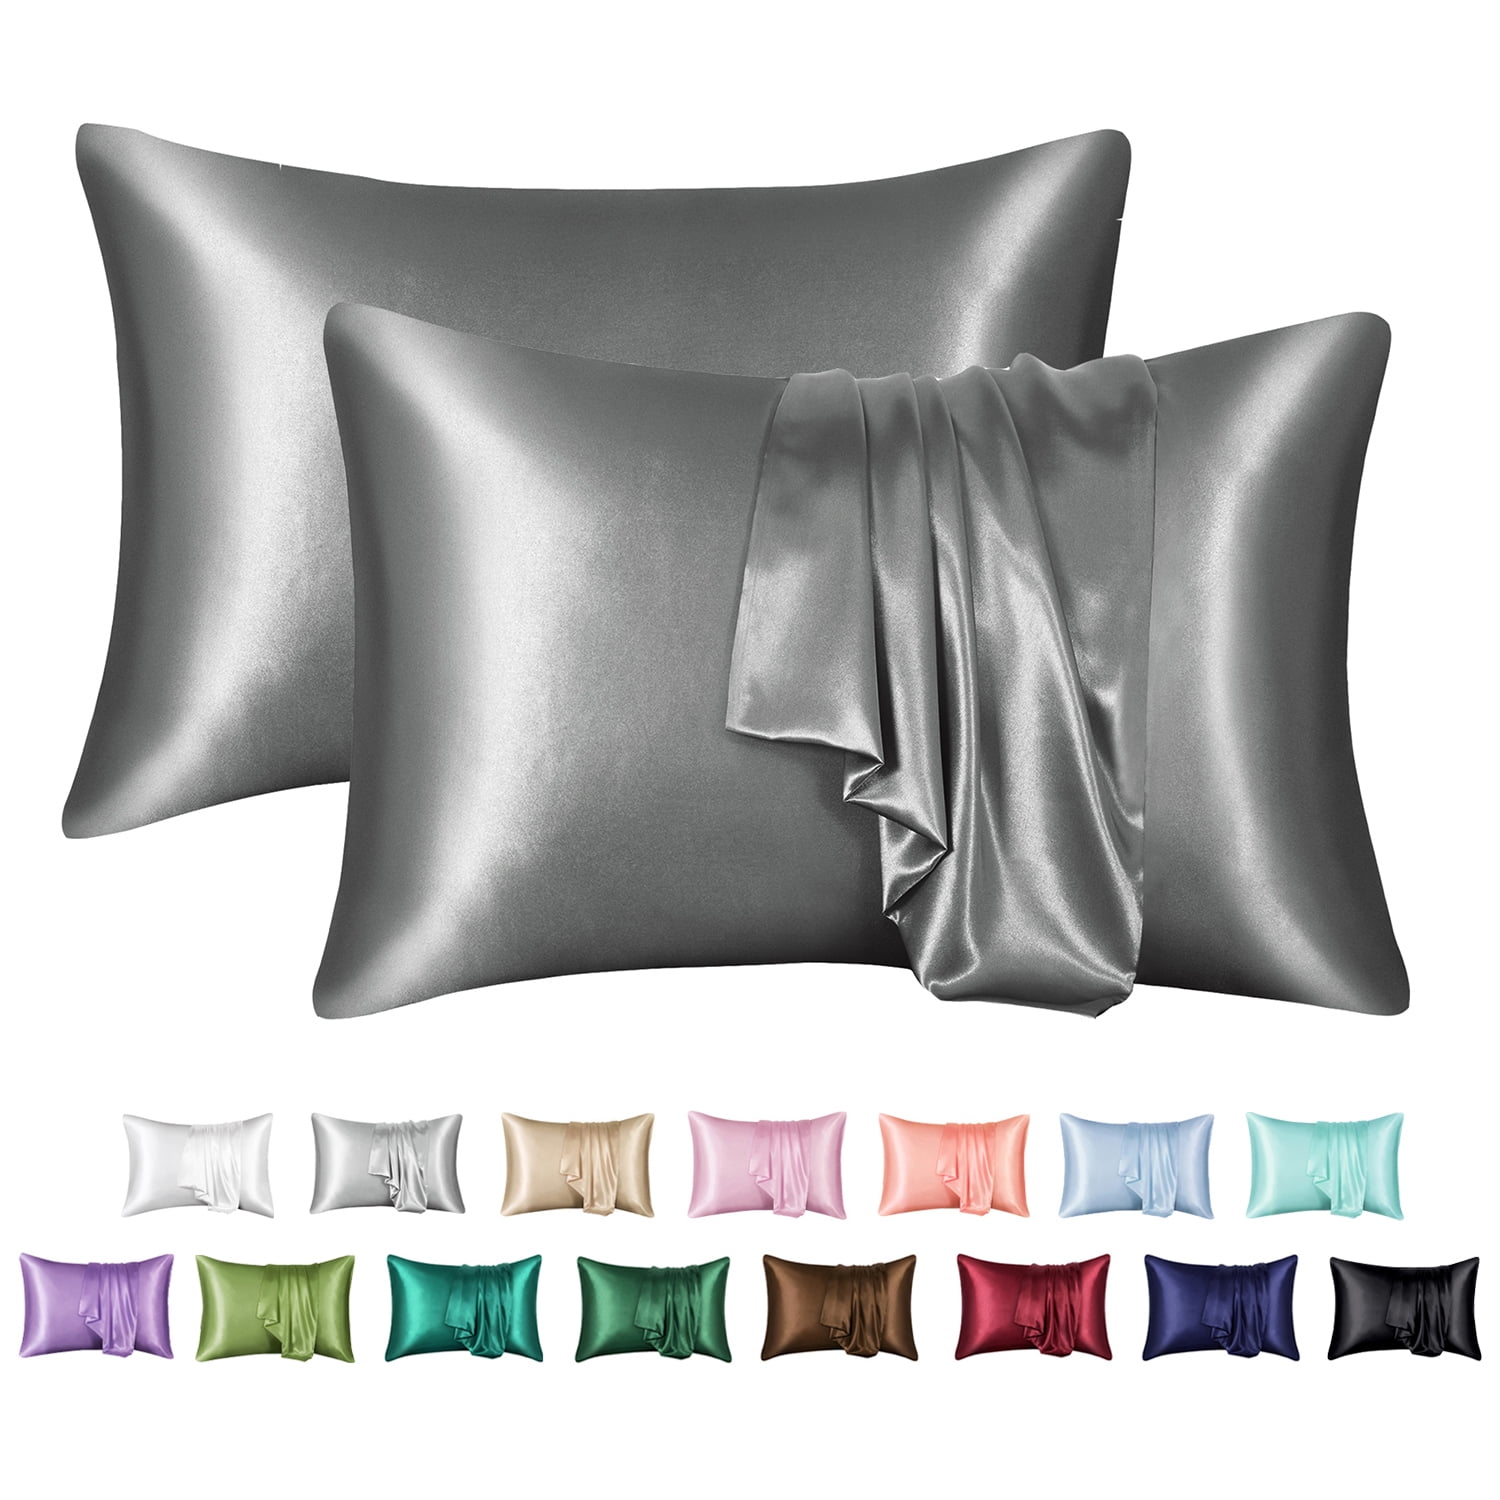 Details about   Zippered Satin Standard Pillowcases Silky Soft Luxury White 20" x 26" bedrooms 